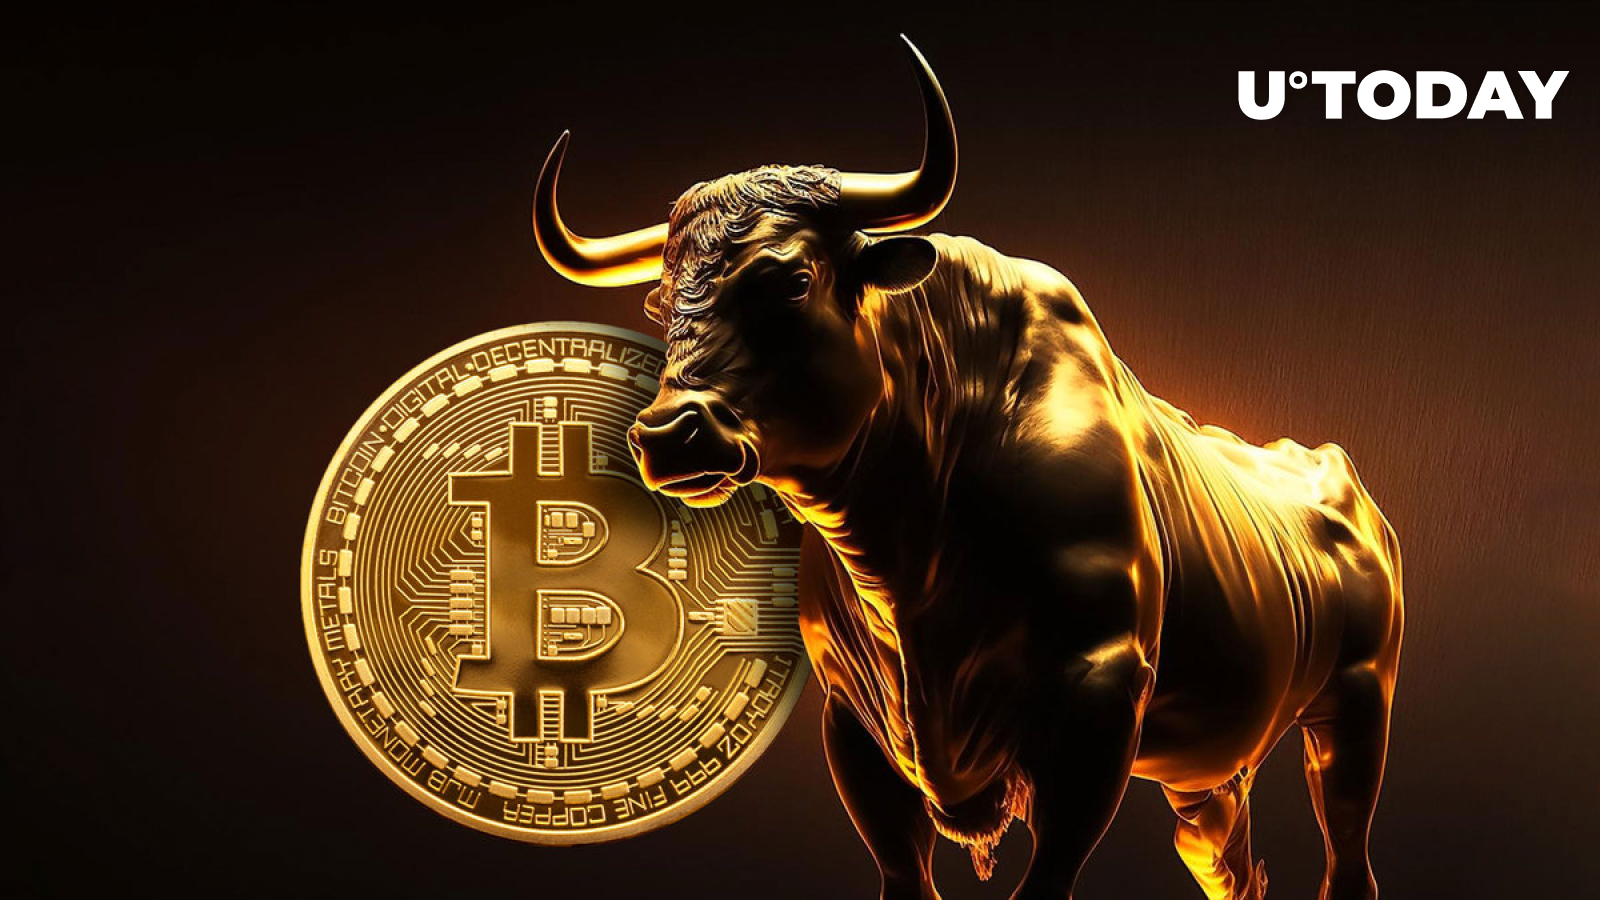 Bitcoin (BTC) Price Soars to Highest Level Since 2021